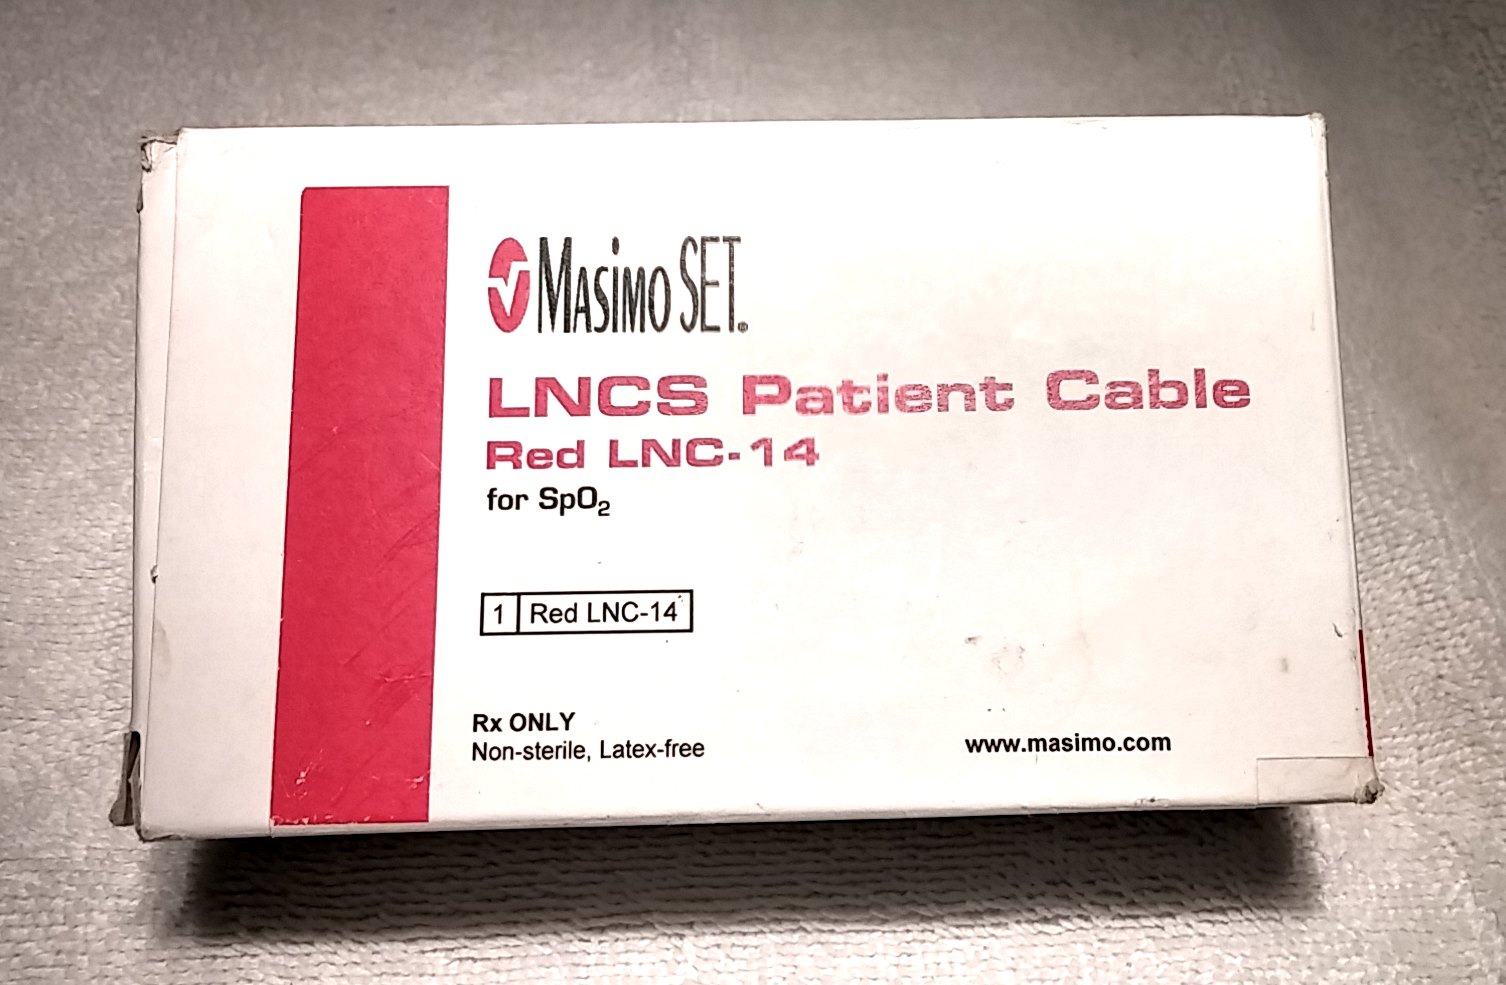 Masimo New LNCS Patient Cable red LNC-14